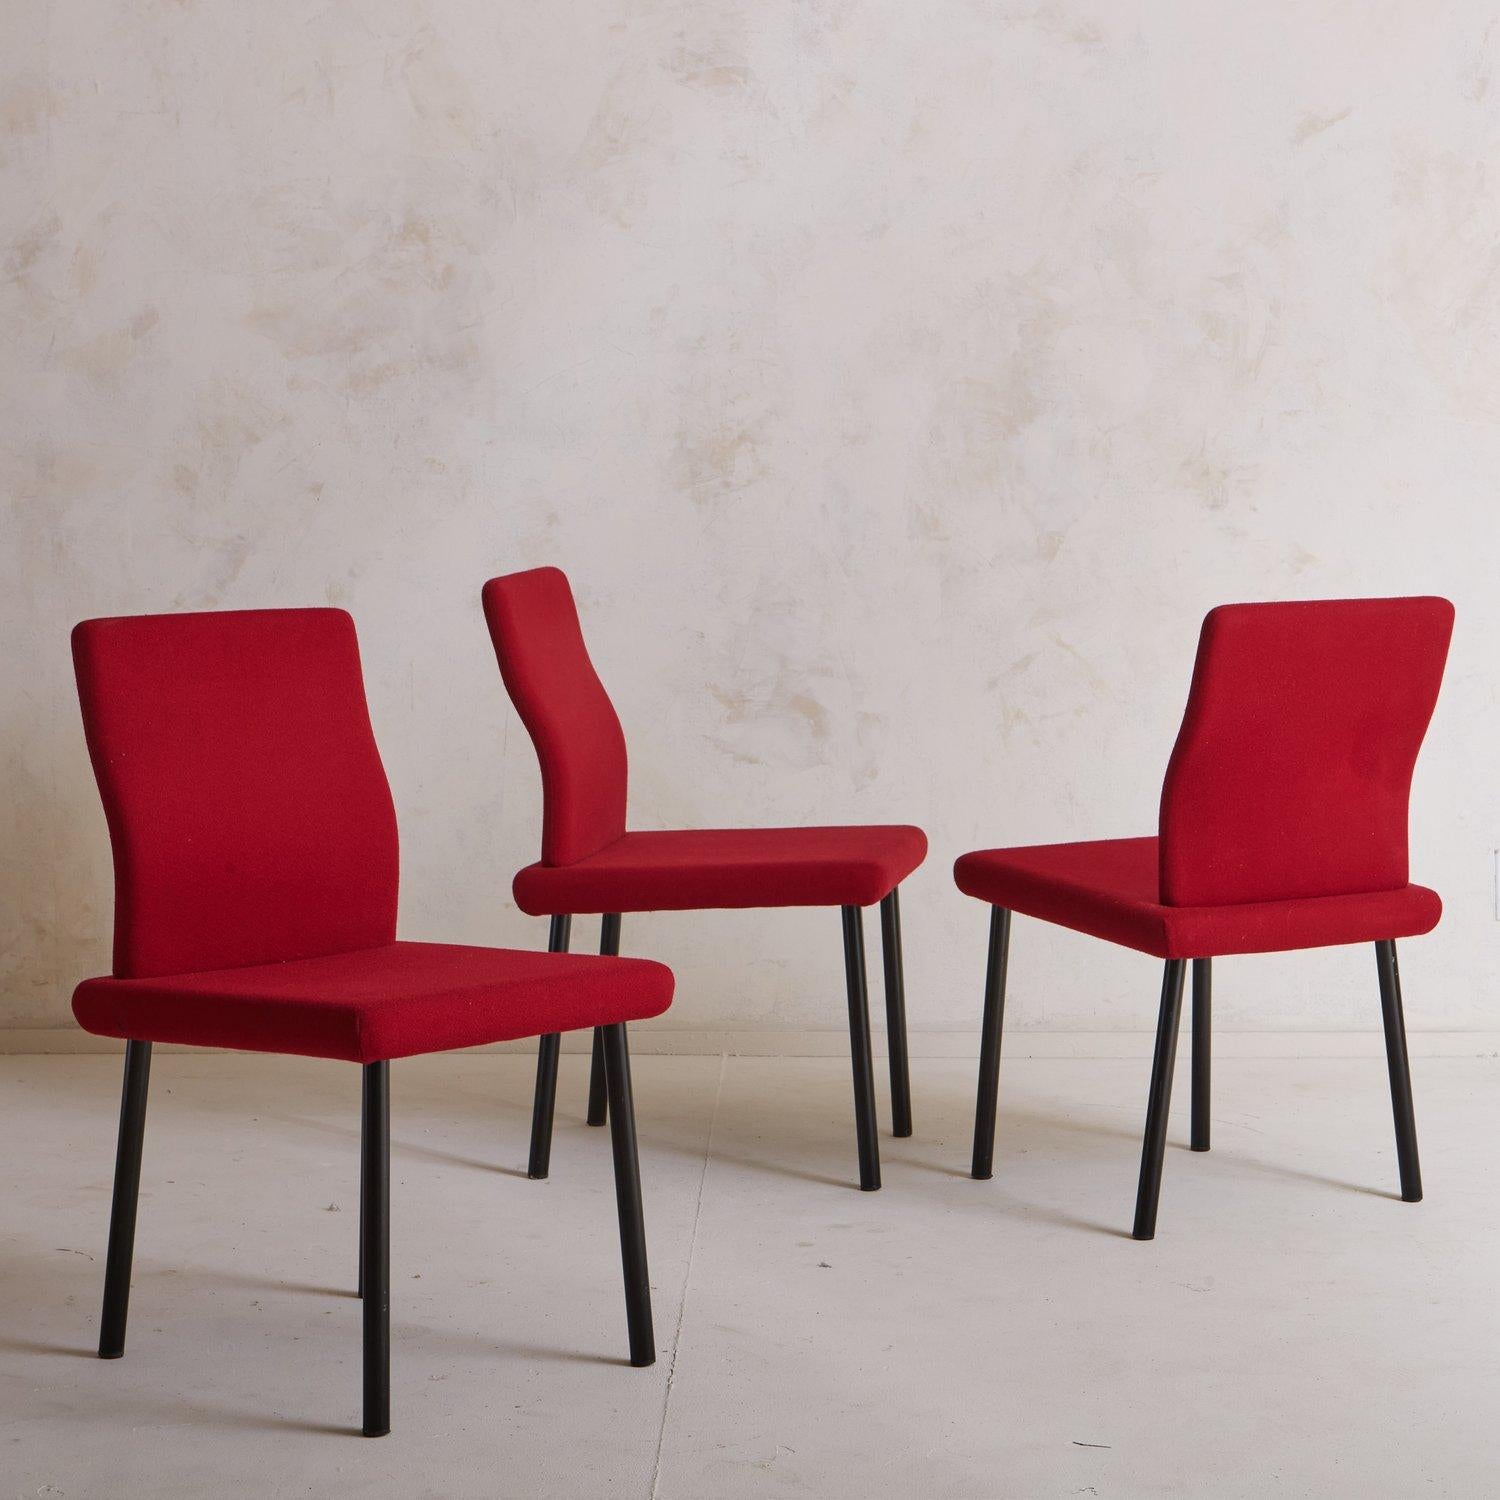 Mid-Century Modern Red Mandarin Chair Attributed to Ettore Sottsass for Knoll, 1990s  For Sale